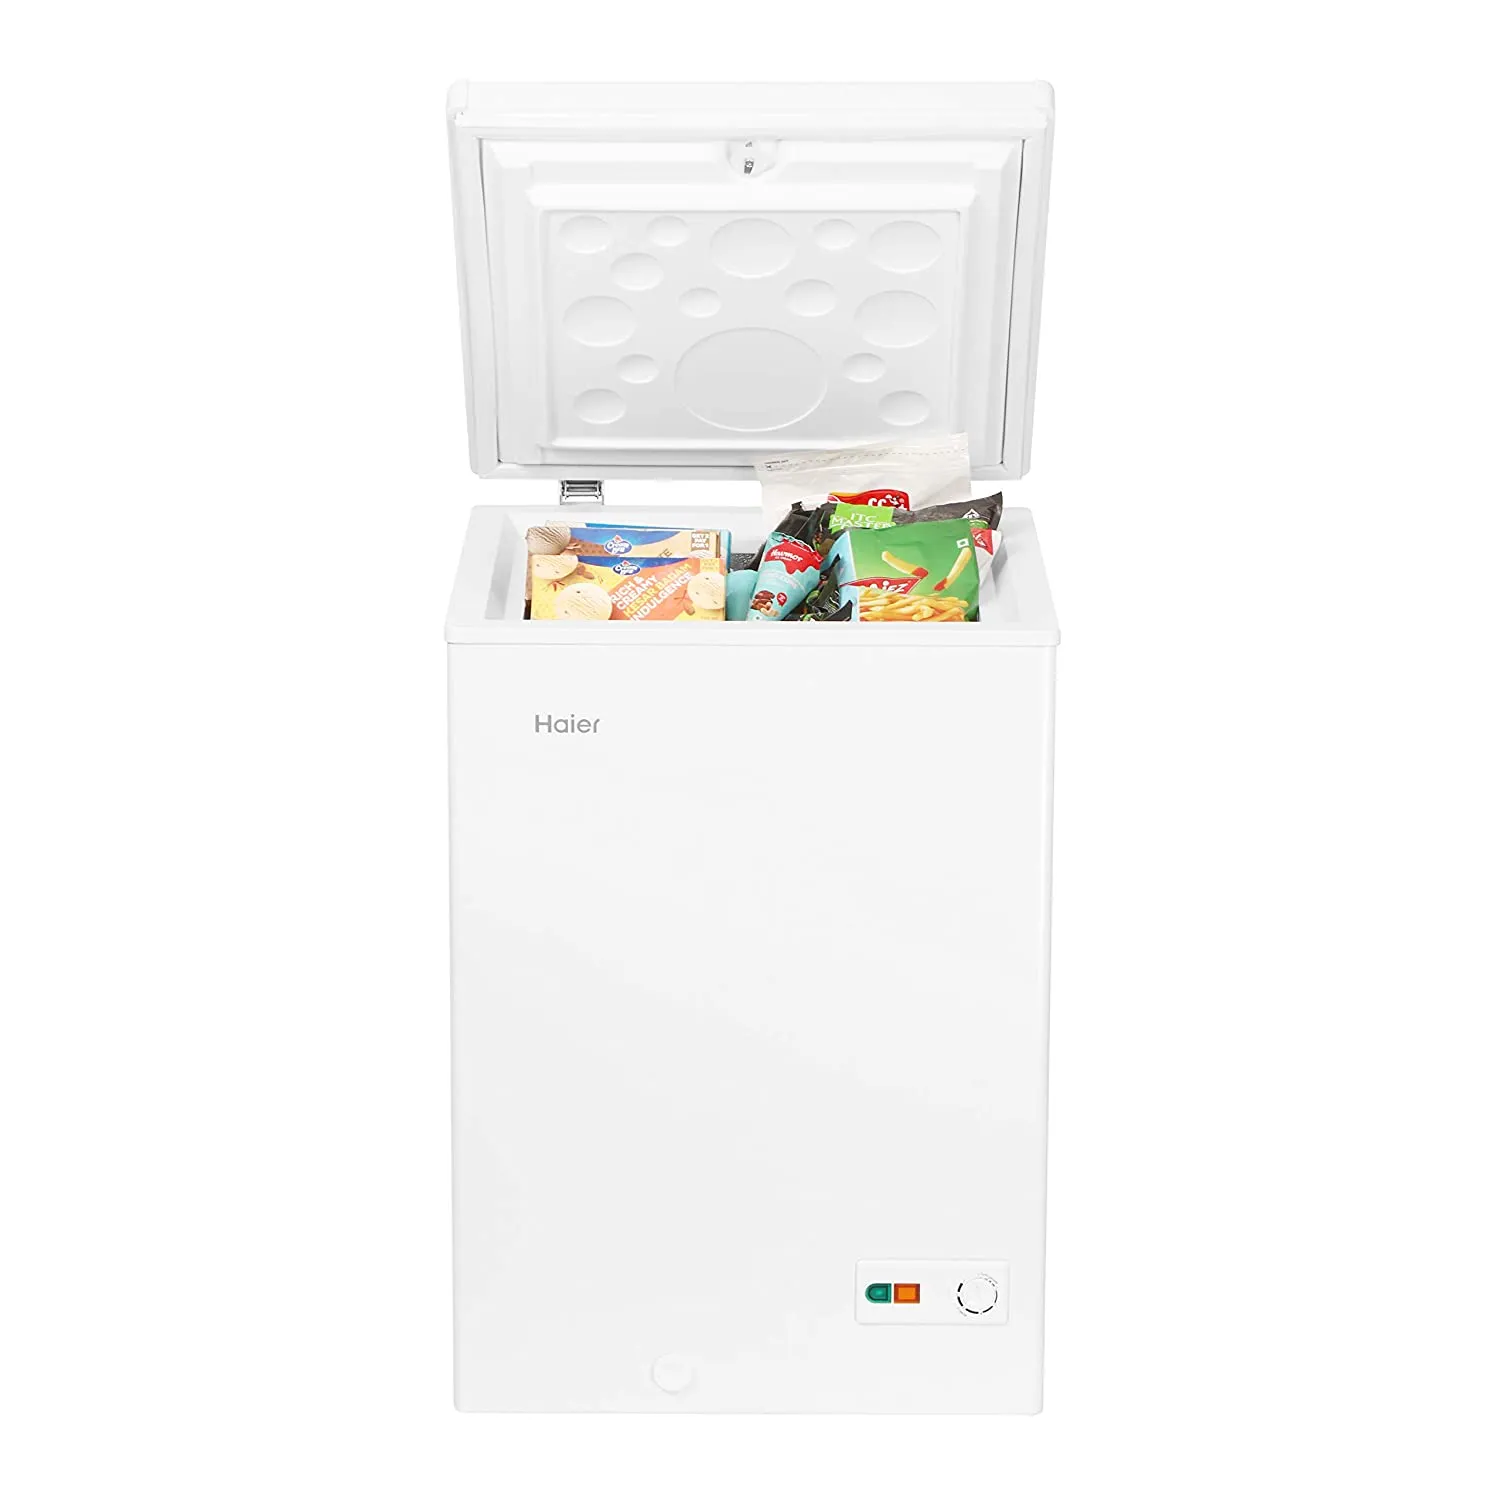 Haier - More space with less hassle. Haier deep freezers